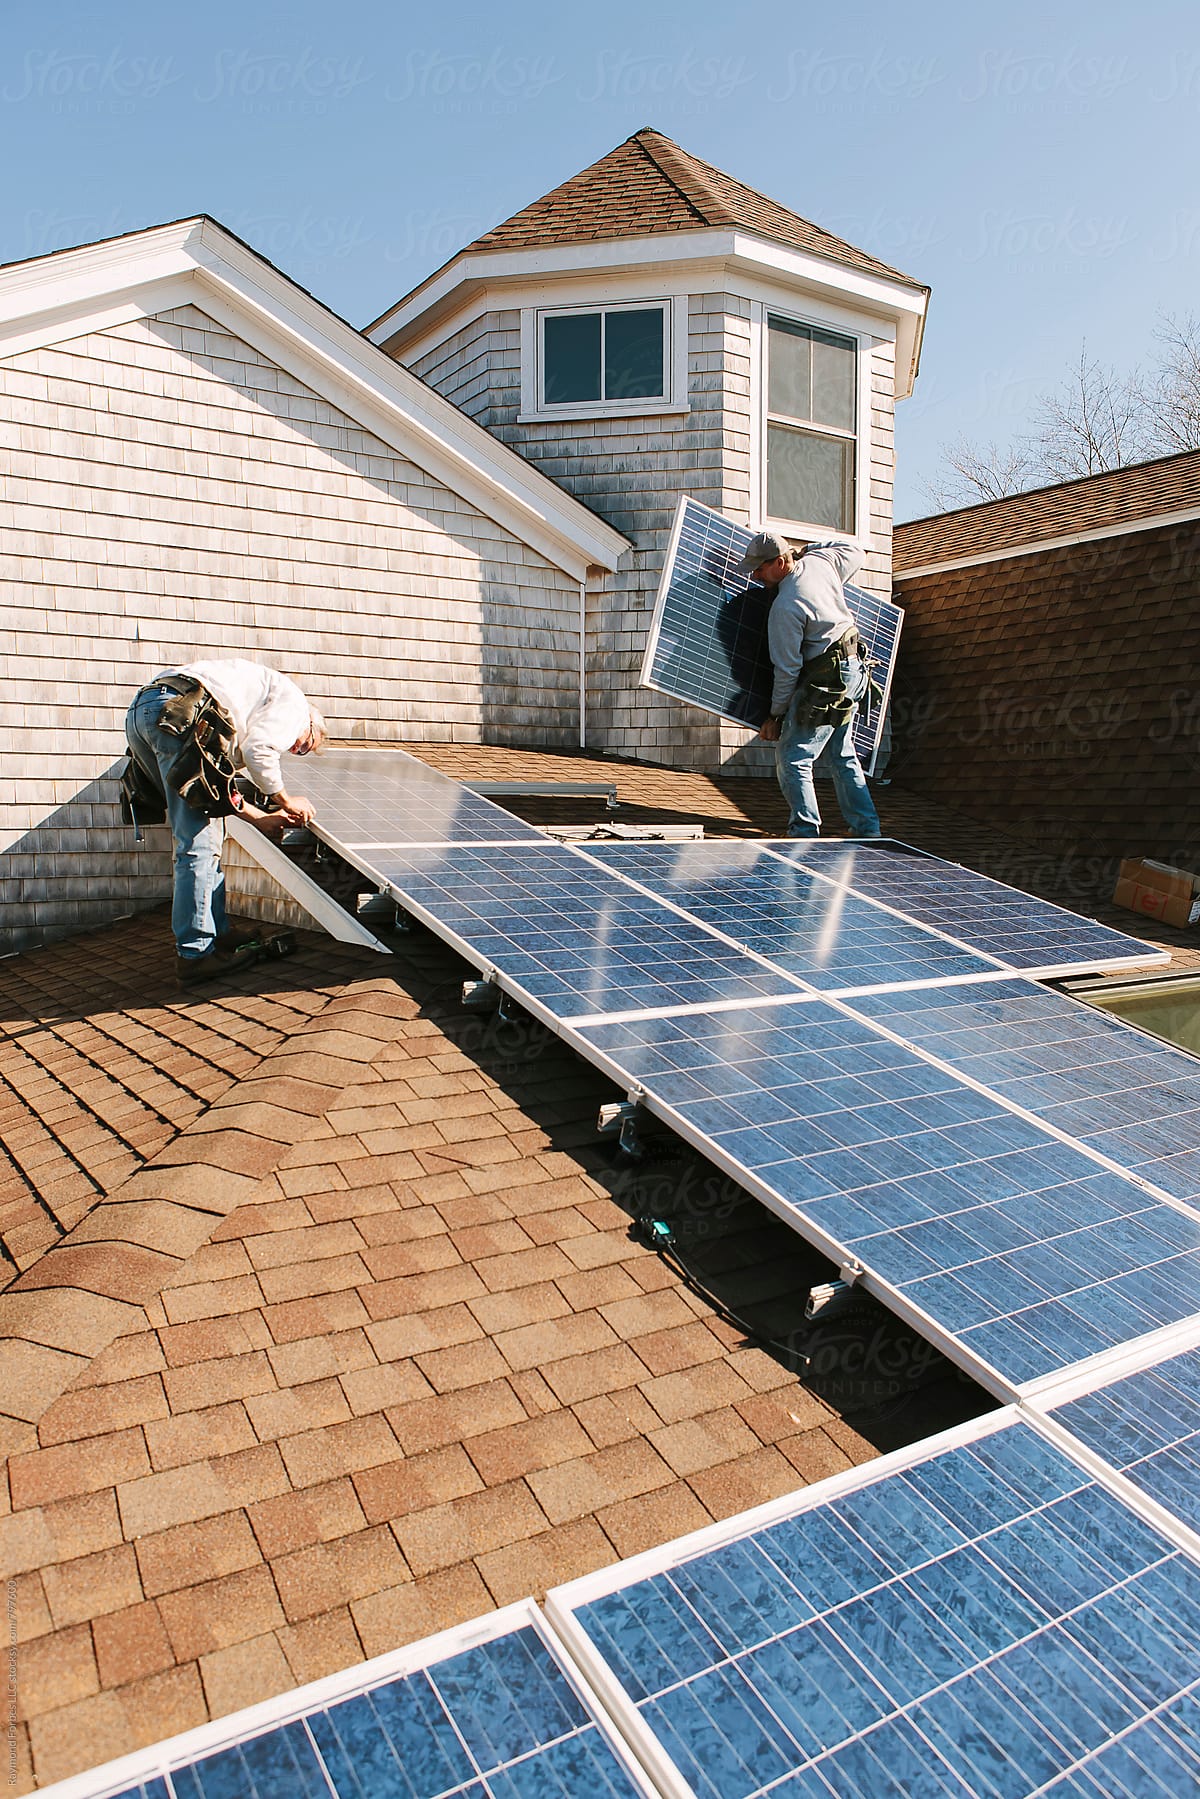 blue collar worker solar Installation on roof of Home